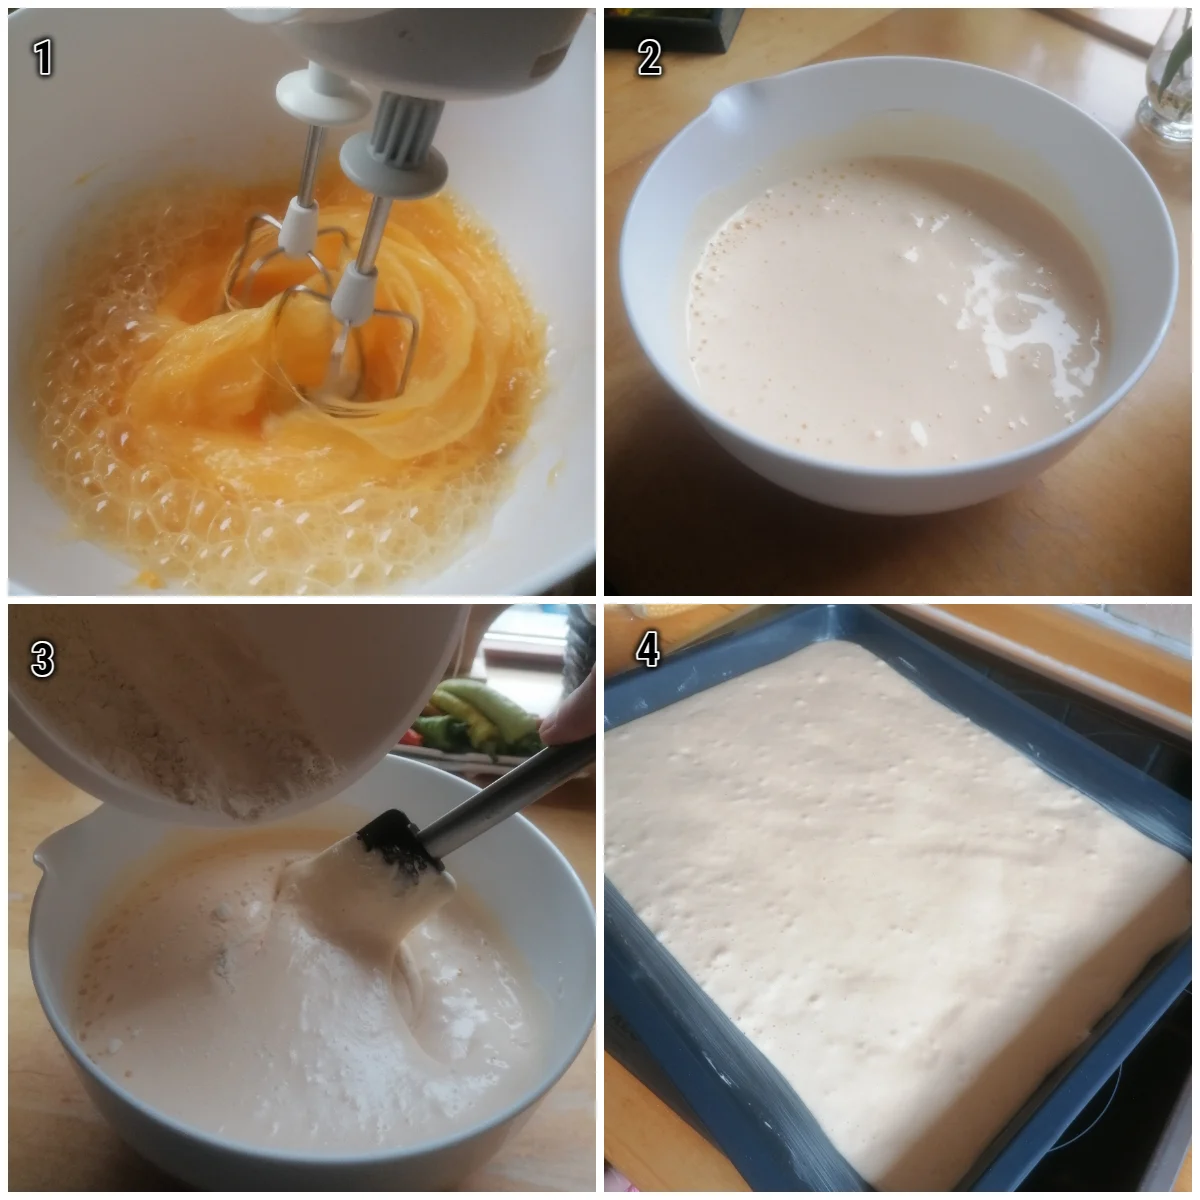 Step-by-step image guide on how to make sponge cake.